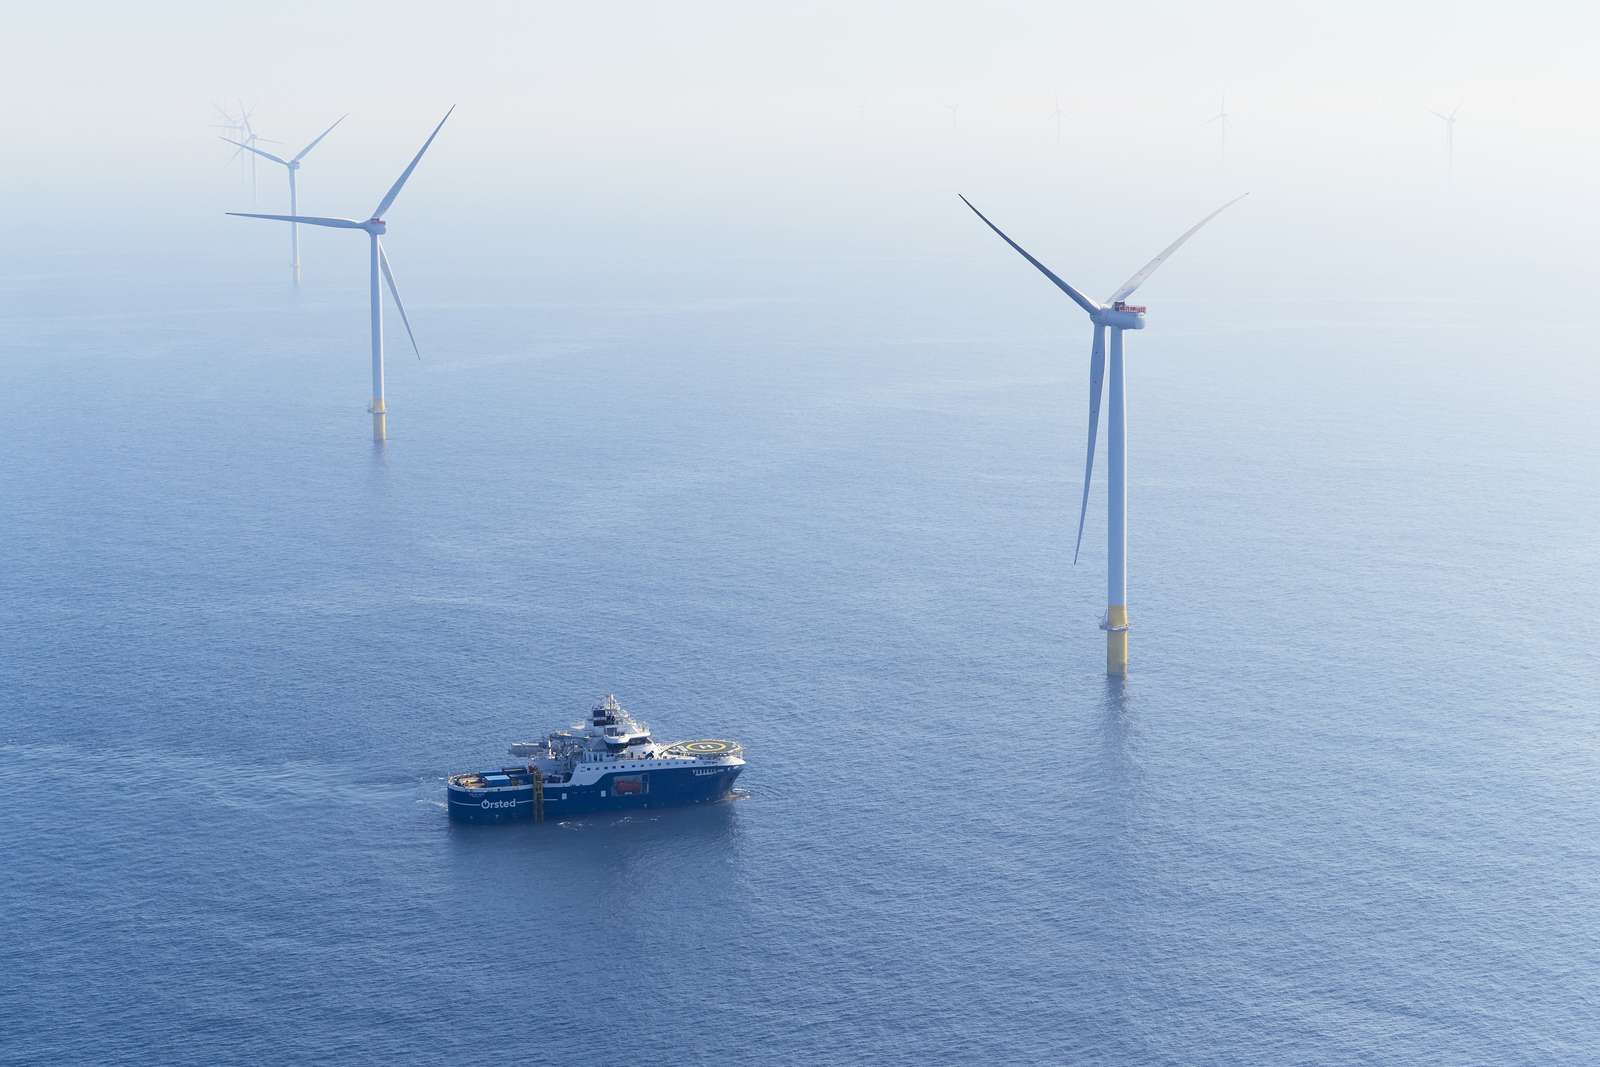 Image of vessel in foreground with offshore wind turbines in background